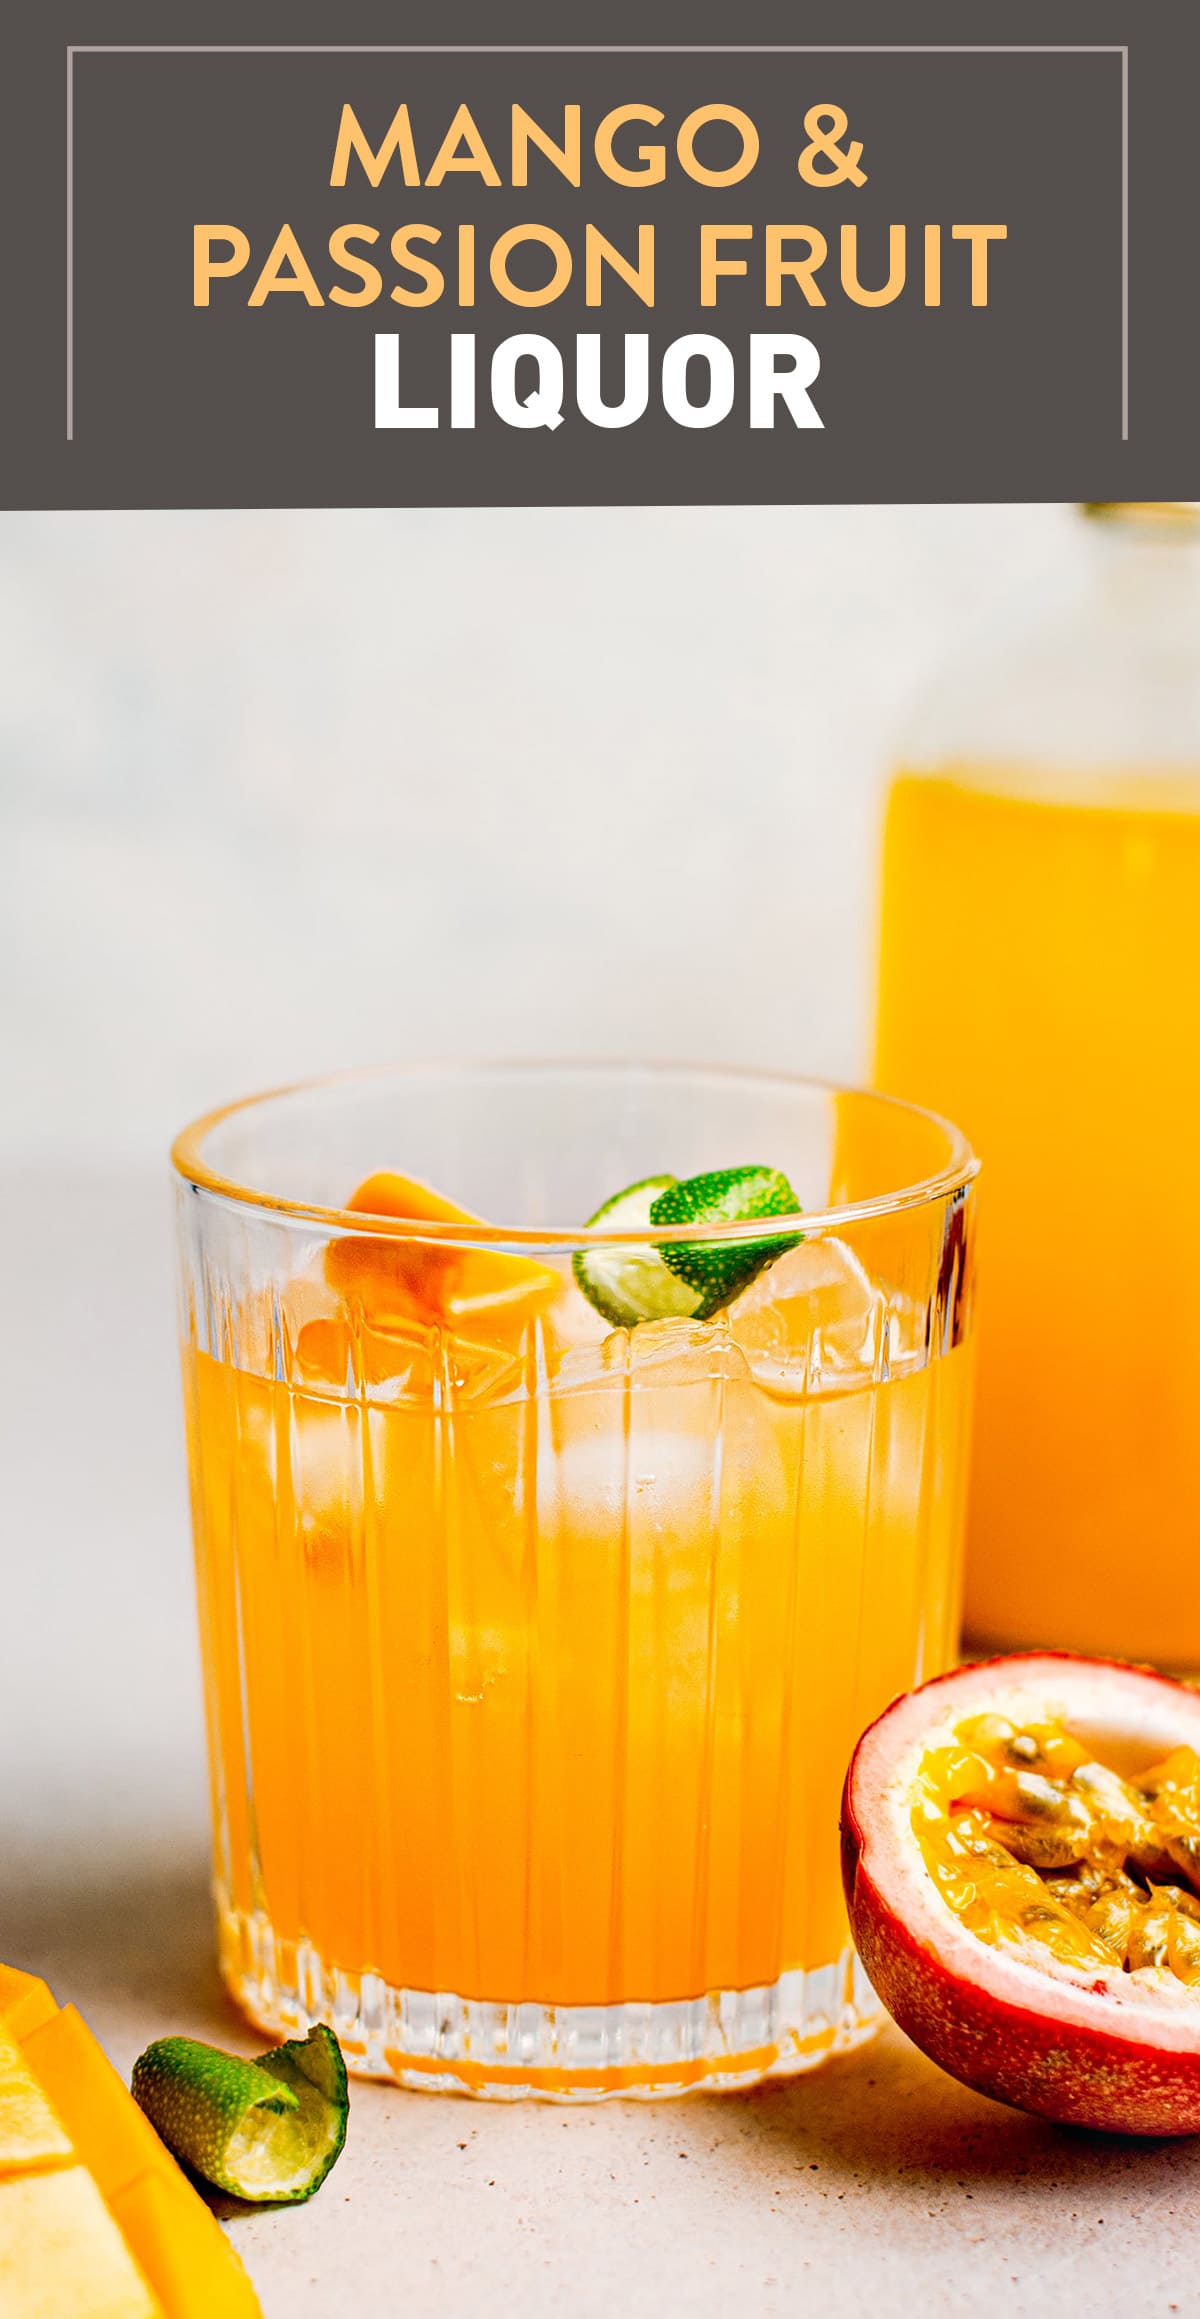 Fresh and fruity homemade liquor infused with fresh mango and passion fruit! Serve chilled as an appetizer or use as a base for cocktails! #liquor #mango #drinks